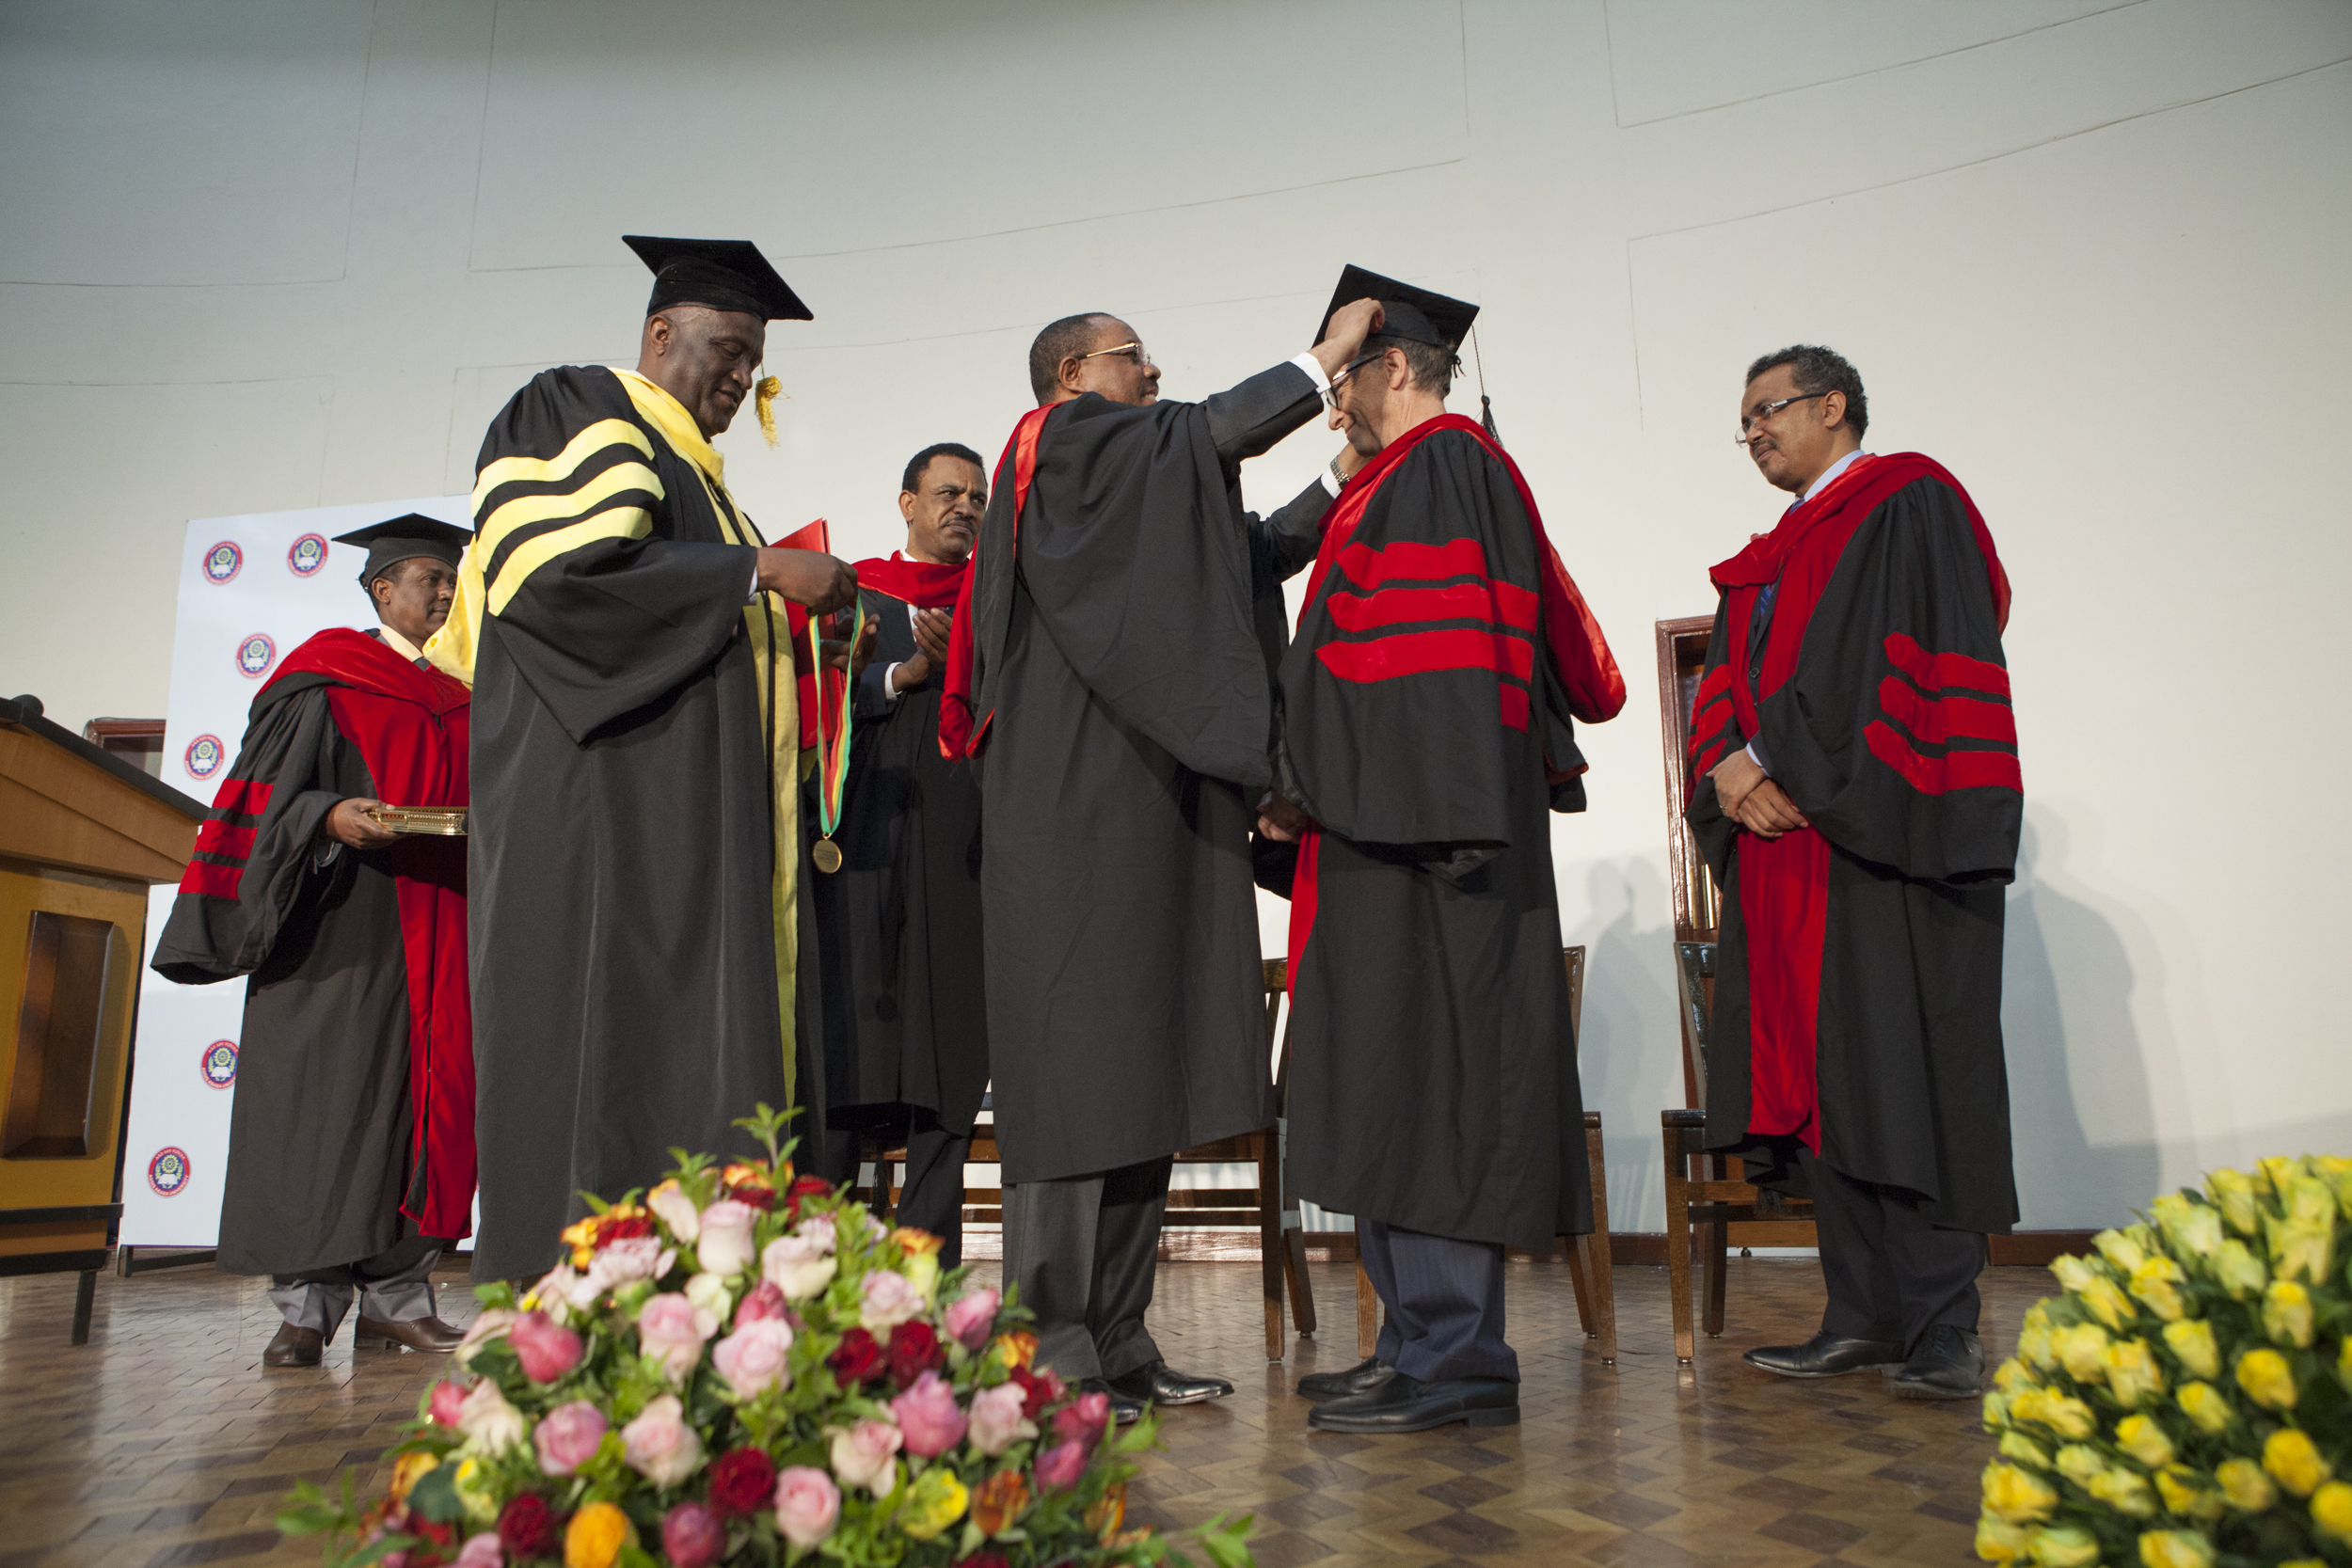  HE. Hailemariam Desalegn, Prime Minister of Ethiopia, Bill Gates, Co-Chair of Bill and Melinda Gates Foundation, are pictured during the Doctorate Degree Honouring Bill Gates at Addis Ababa University in Addis Ababa Ethiopia on 24 July 2014. Bill Ga